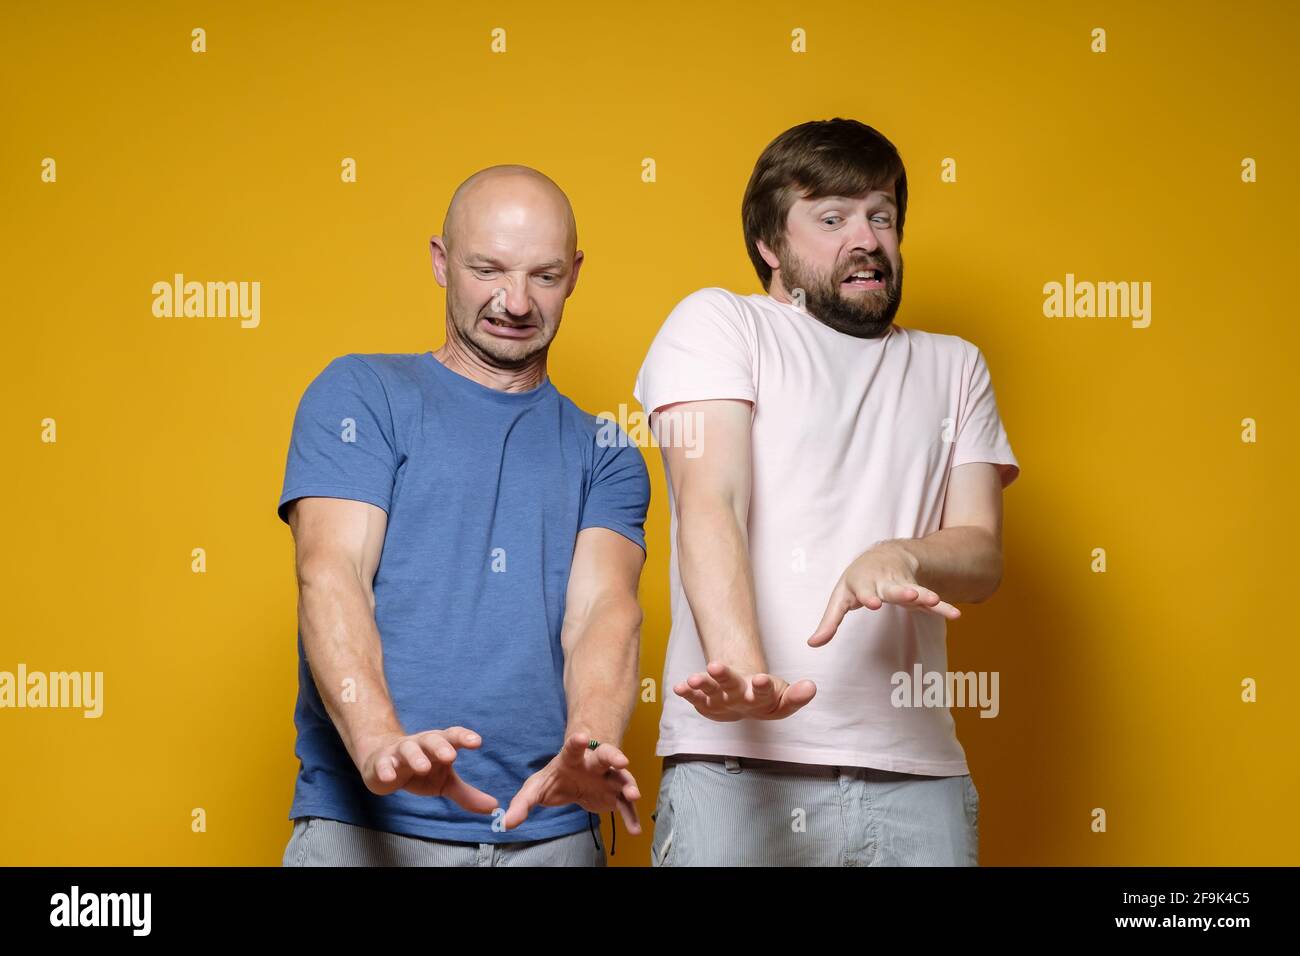 Two frightened, surprised men make a stop gesture with their arms outstretched and look down with disgust and dislike.  Stock Photo